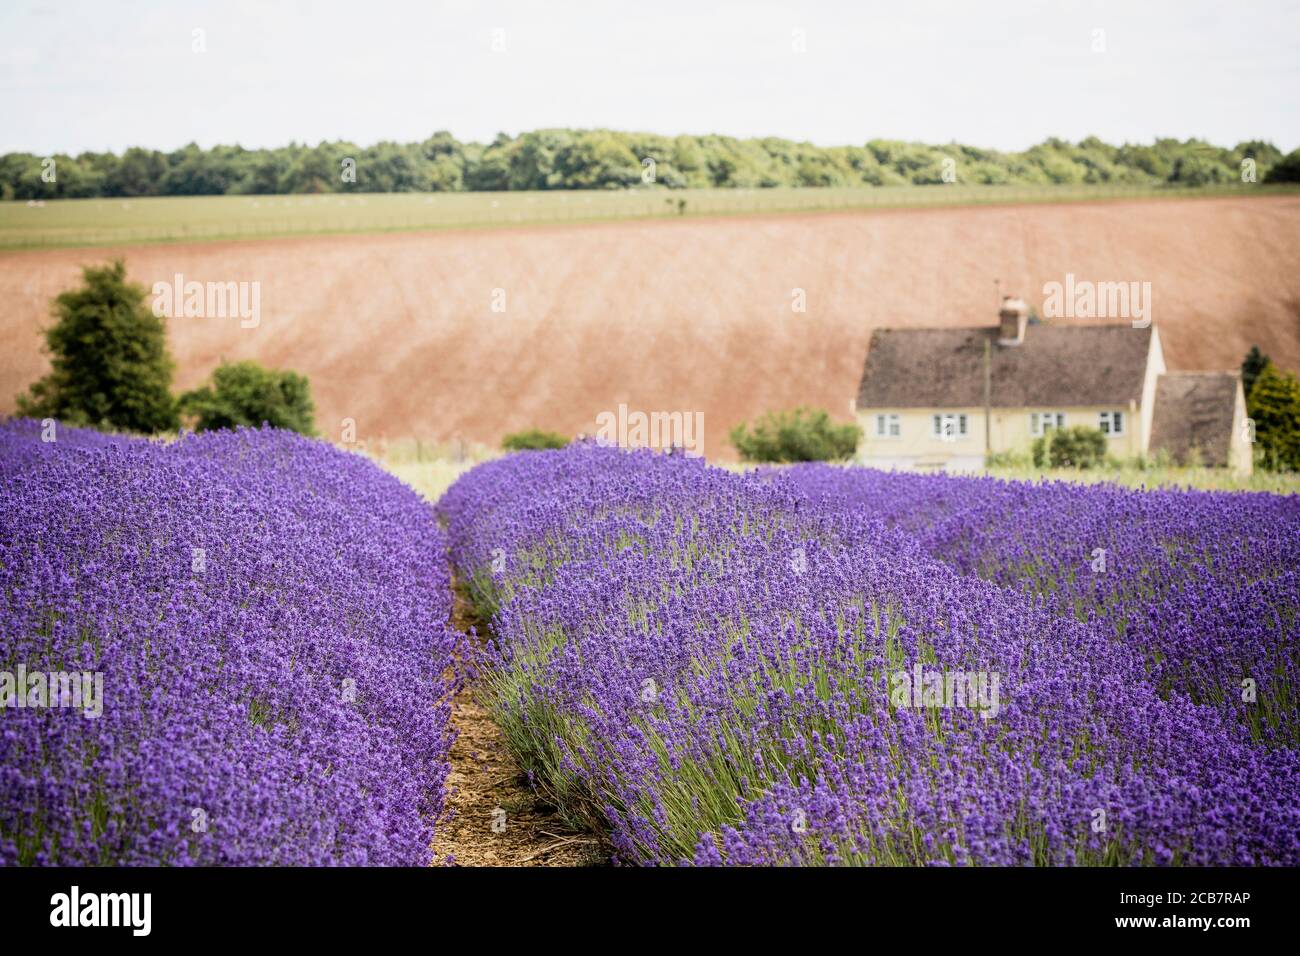 Lavender, Lavdendula, Rows of purple coloured flowers growing outdoor on farm. Stock Photo